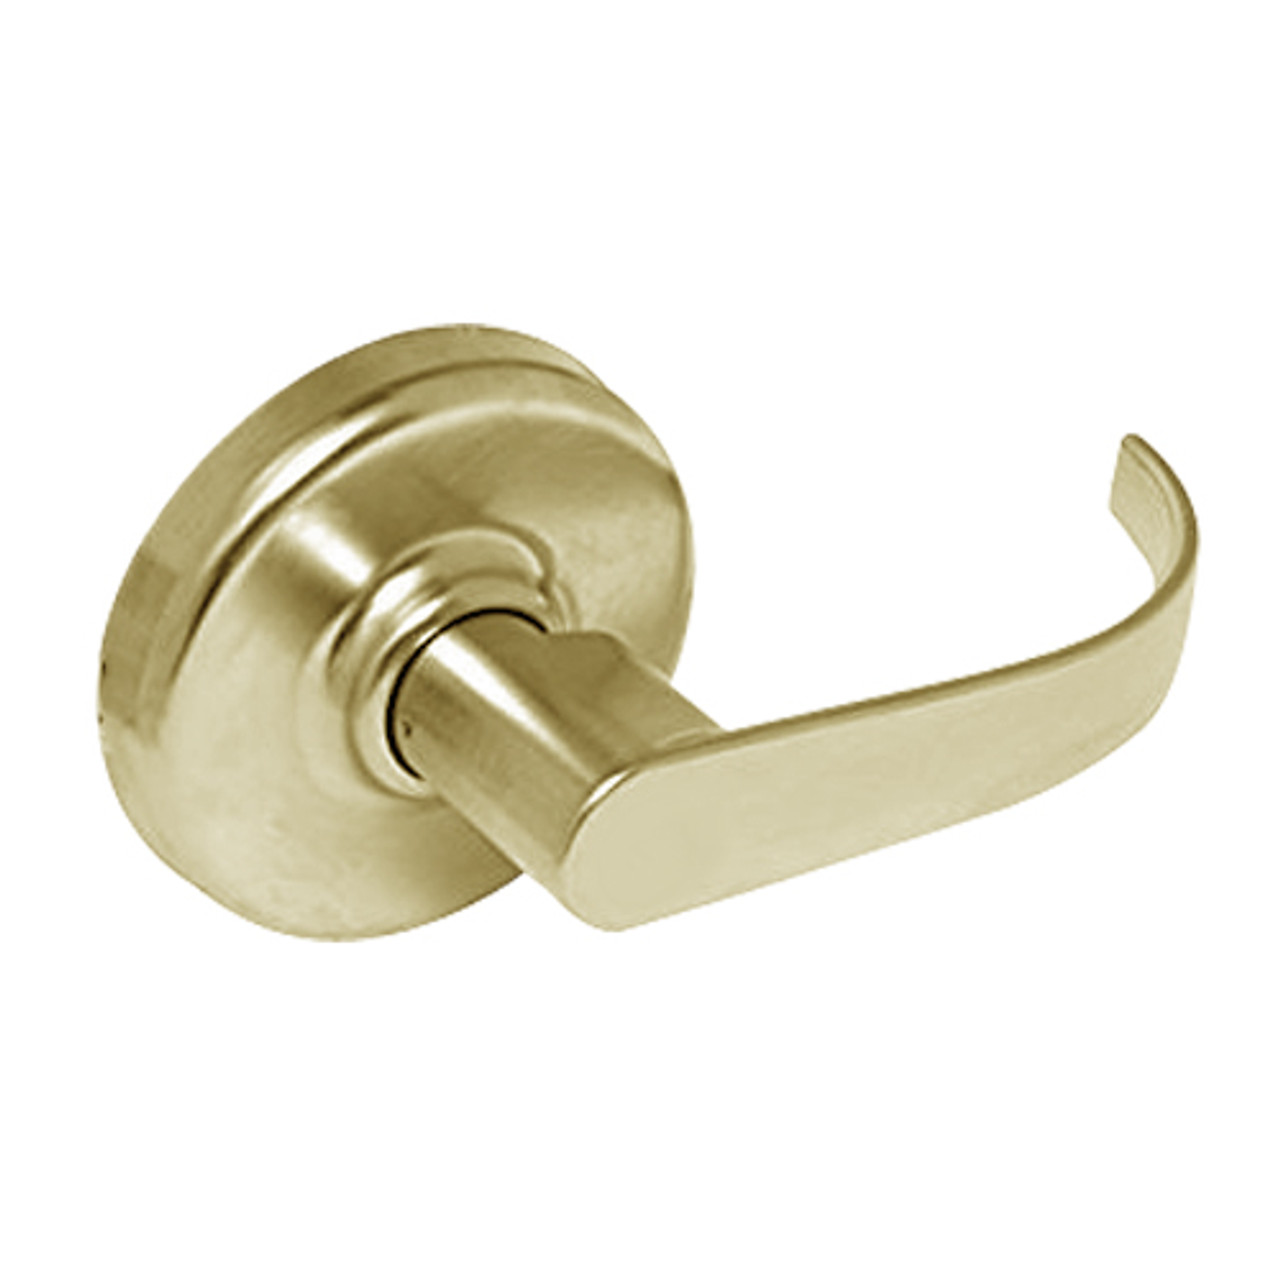 CL3170-PZD-606 Corbin CL3100 Series Vandal Resistant Full Dummy Cylindrical Locksets with Princeton Lever in Satin Brass Finish